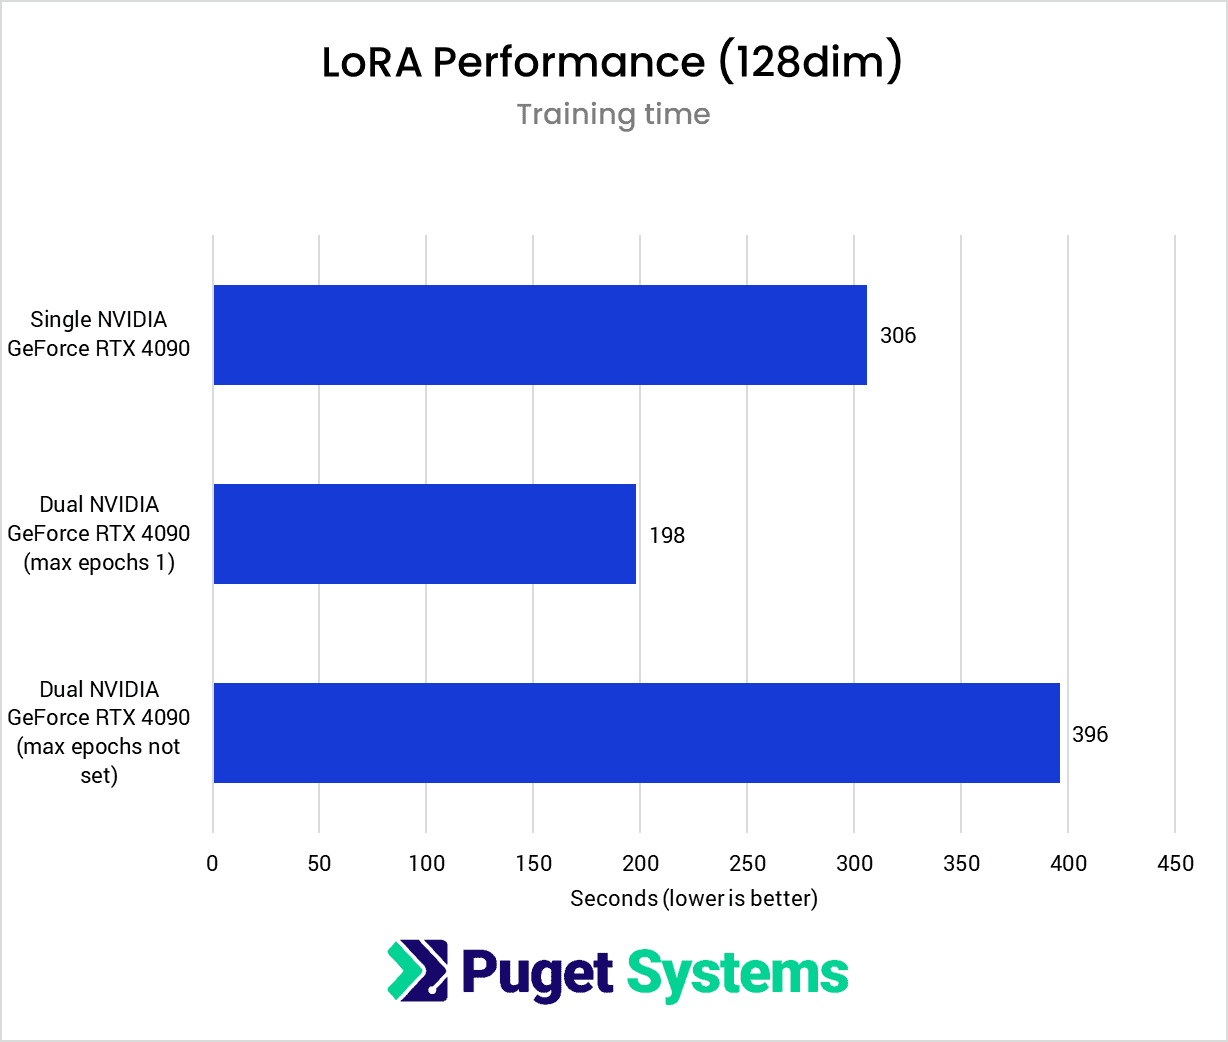 Lora Performance in seconds